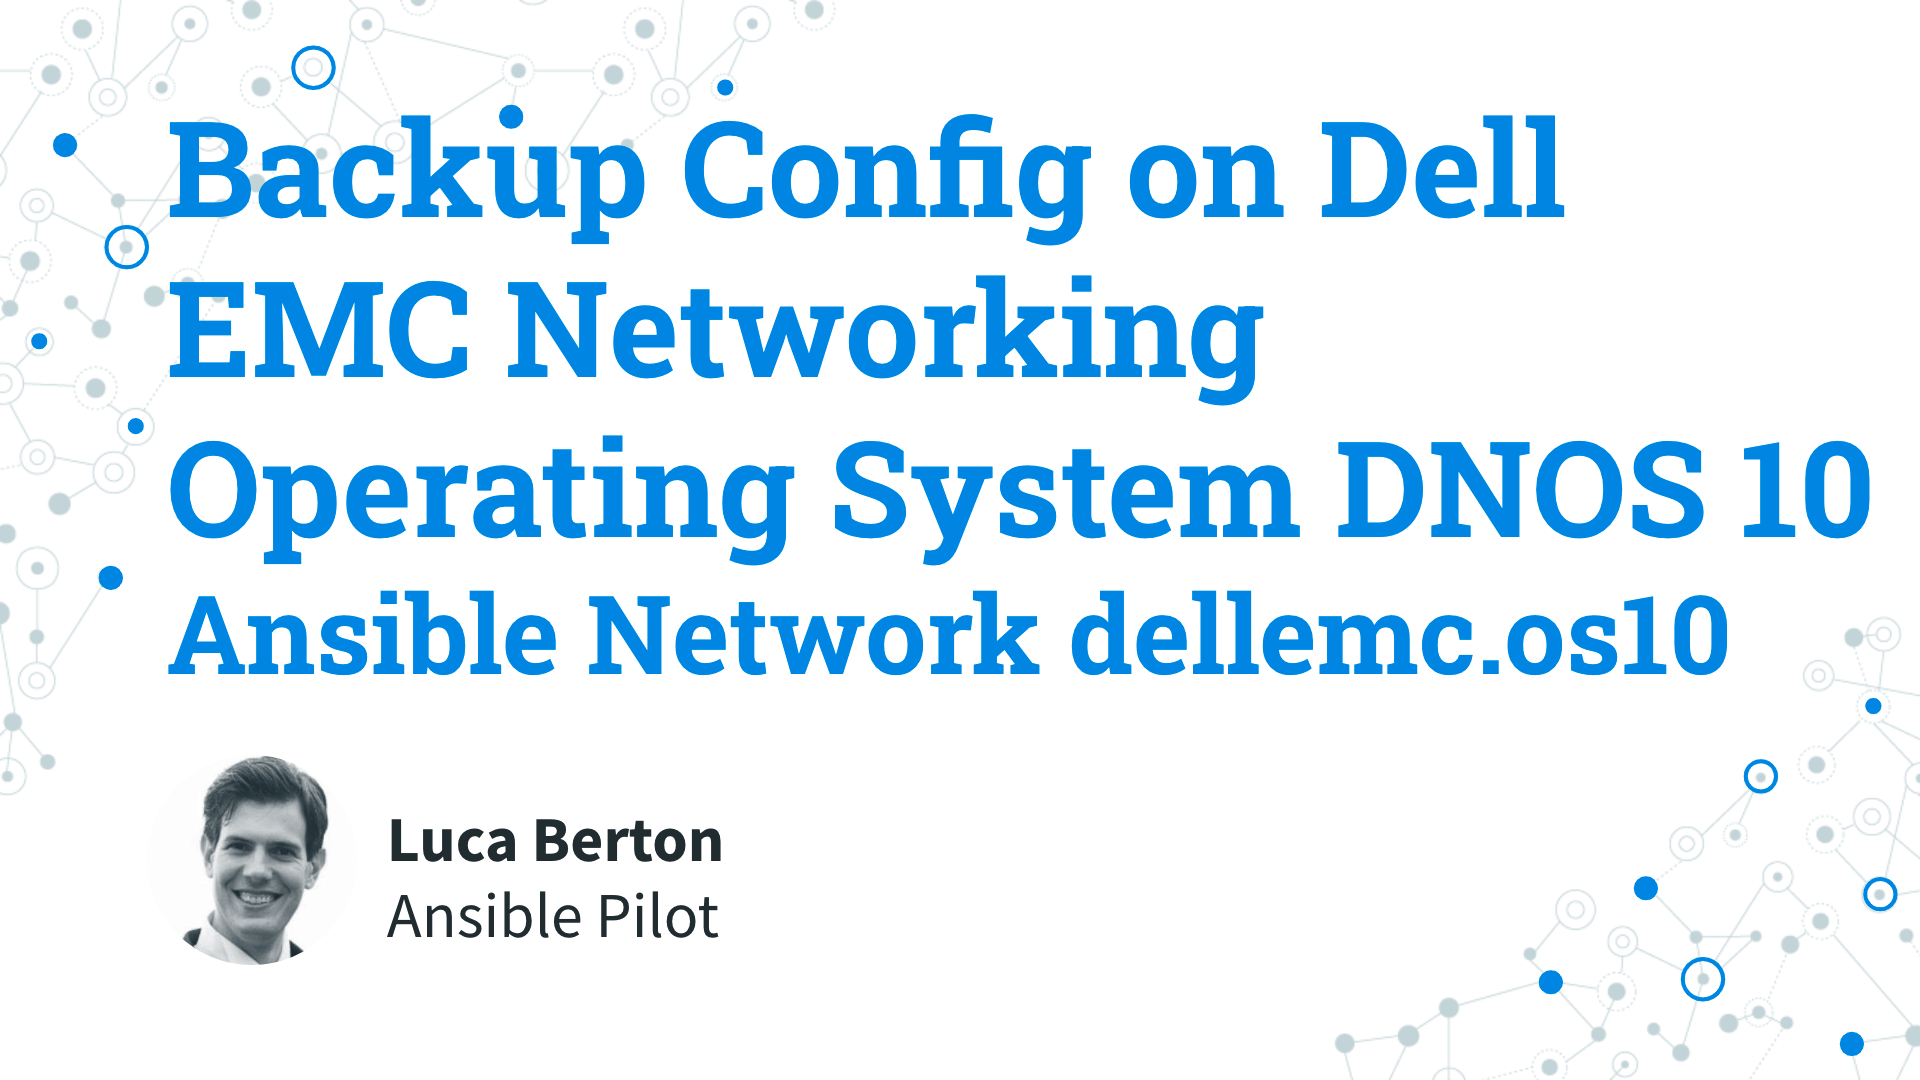 Backup Config on Dell EMC Networking Operating System DNOS 10 - Ansible Network dellemc.os10